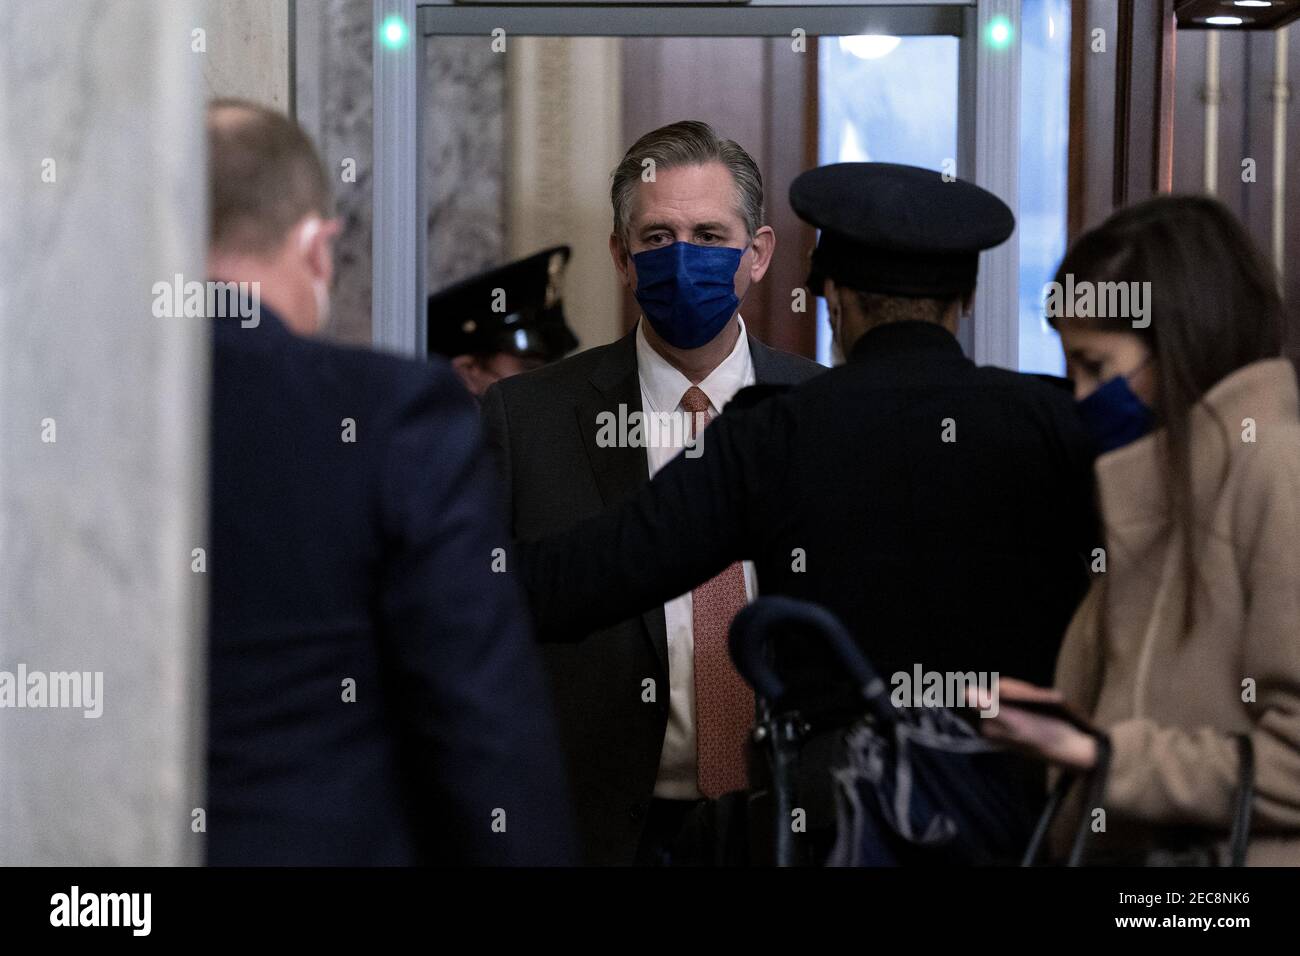 Bruce Castor, defense attorney for Donald Trump, center, goes through security while arriving to the U.S. Capitol in Washington, D.C., U.S., on Saturday, Feb. 13, 2021. The Senate approved 55-45 a request to consider calling witnesses in the second impeachment trial of Donald Trump, a move that may extend the trial that was expected to end within hours. Photo by Stefani Reynolds/Pool/ABACAPRESS.COM Stock Photo